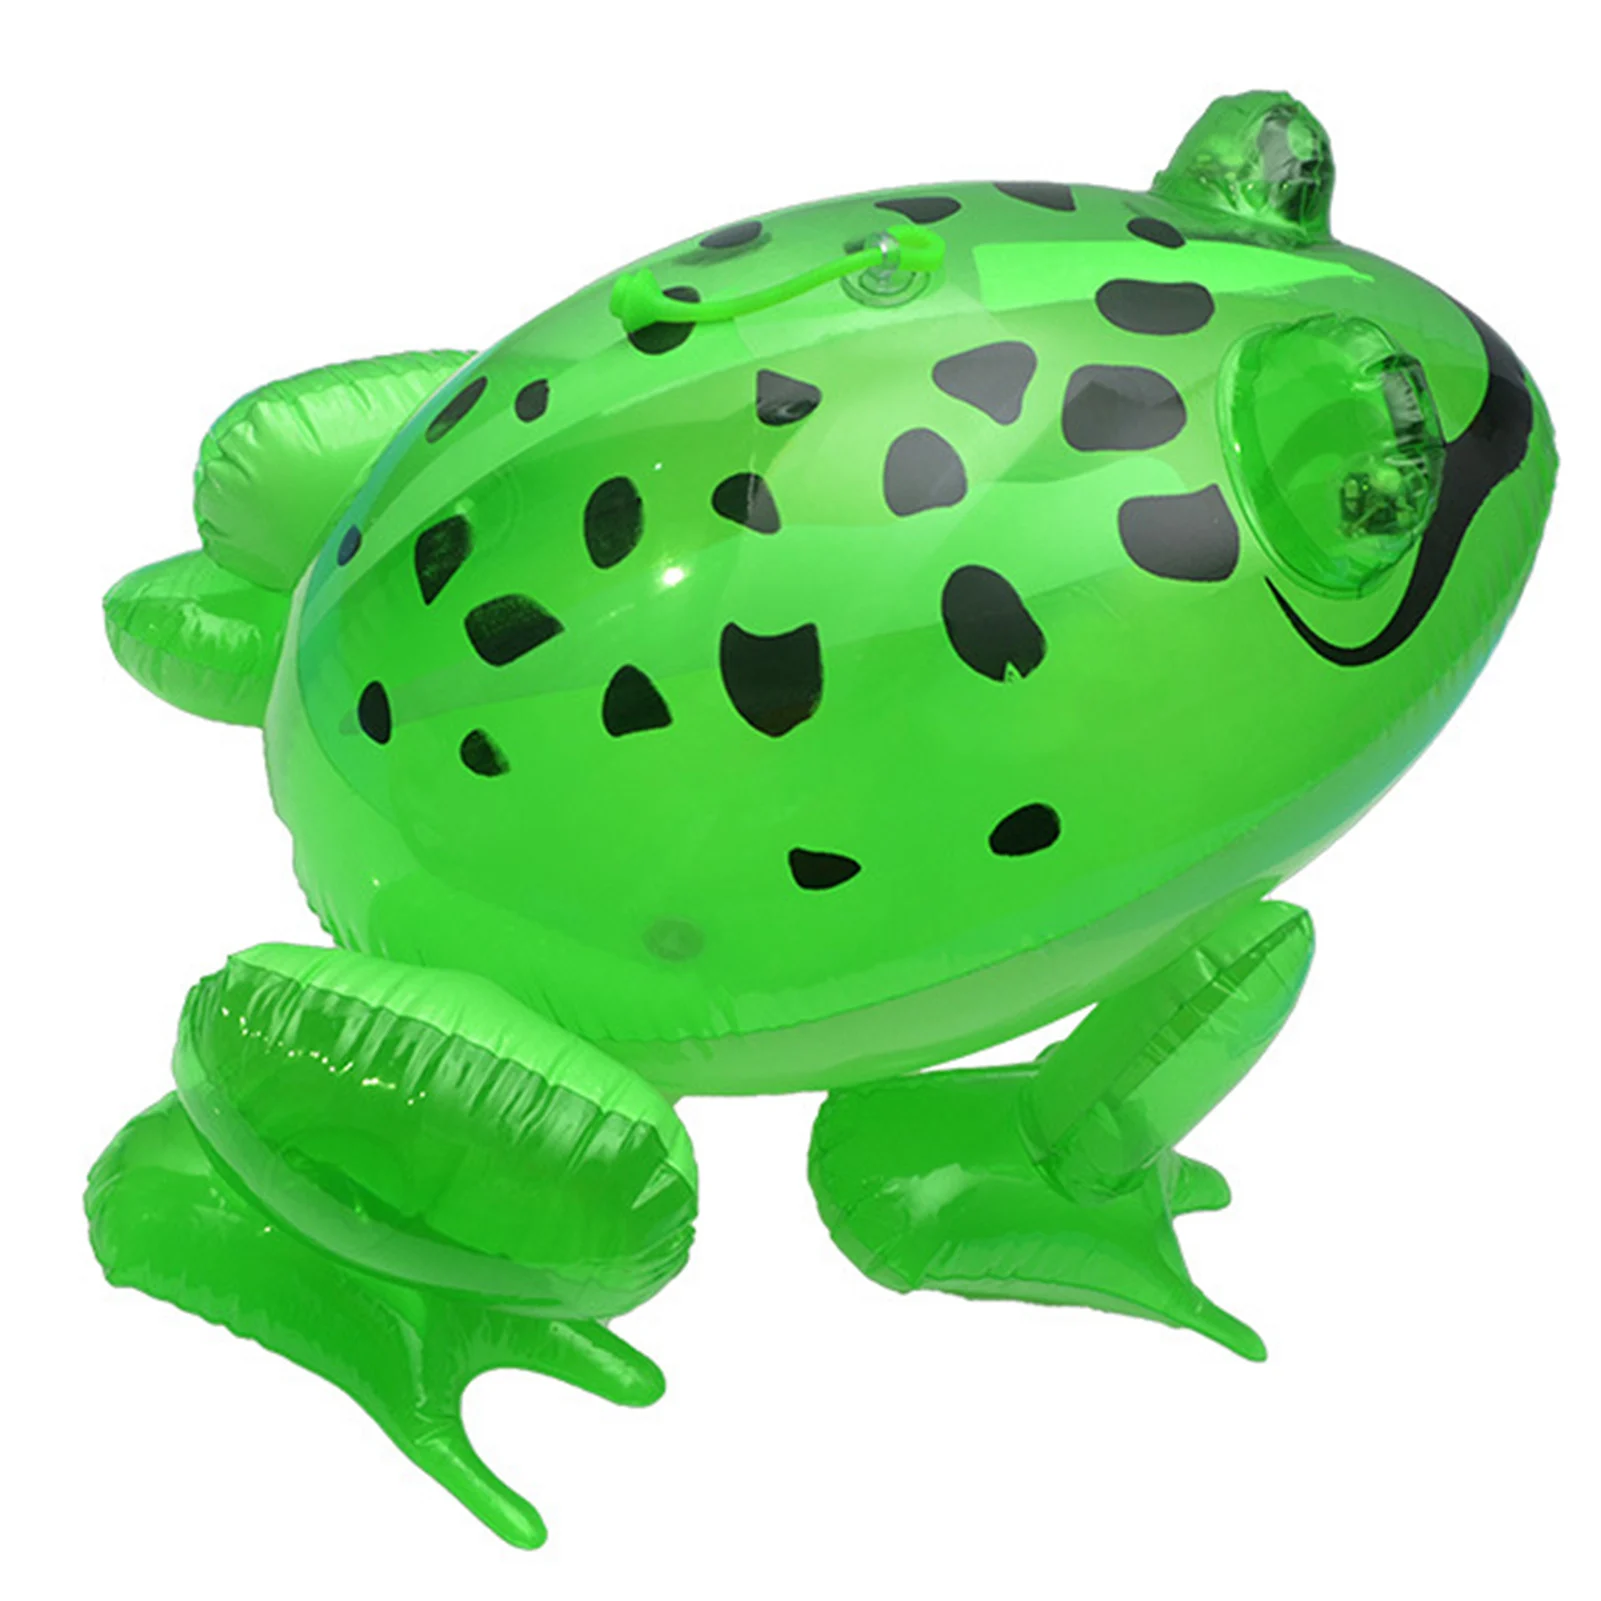 Frog Turtle Inflatables Outdoor Toys Blow up with Build-in LED Lights for - £9.25 GBP+